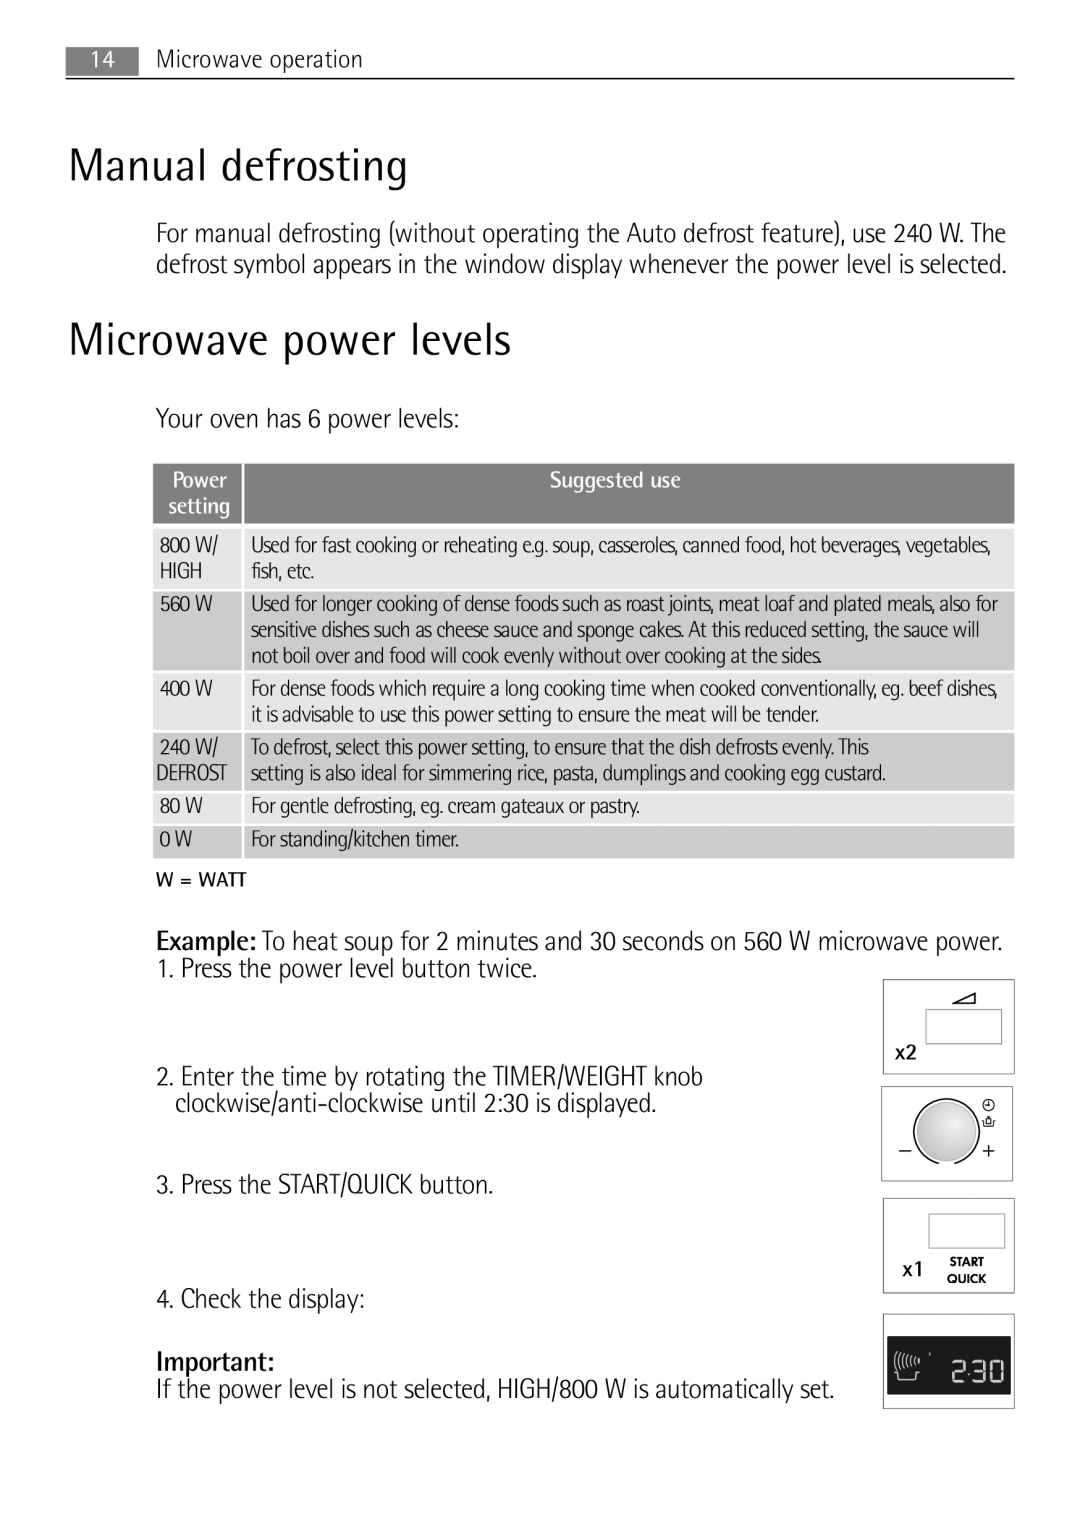 Electrolux MCD1762E, MCD1752E user manual Manual defrosting, Microwave power levels, Your oven has 6 power levels, x2 x1 